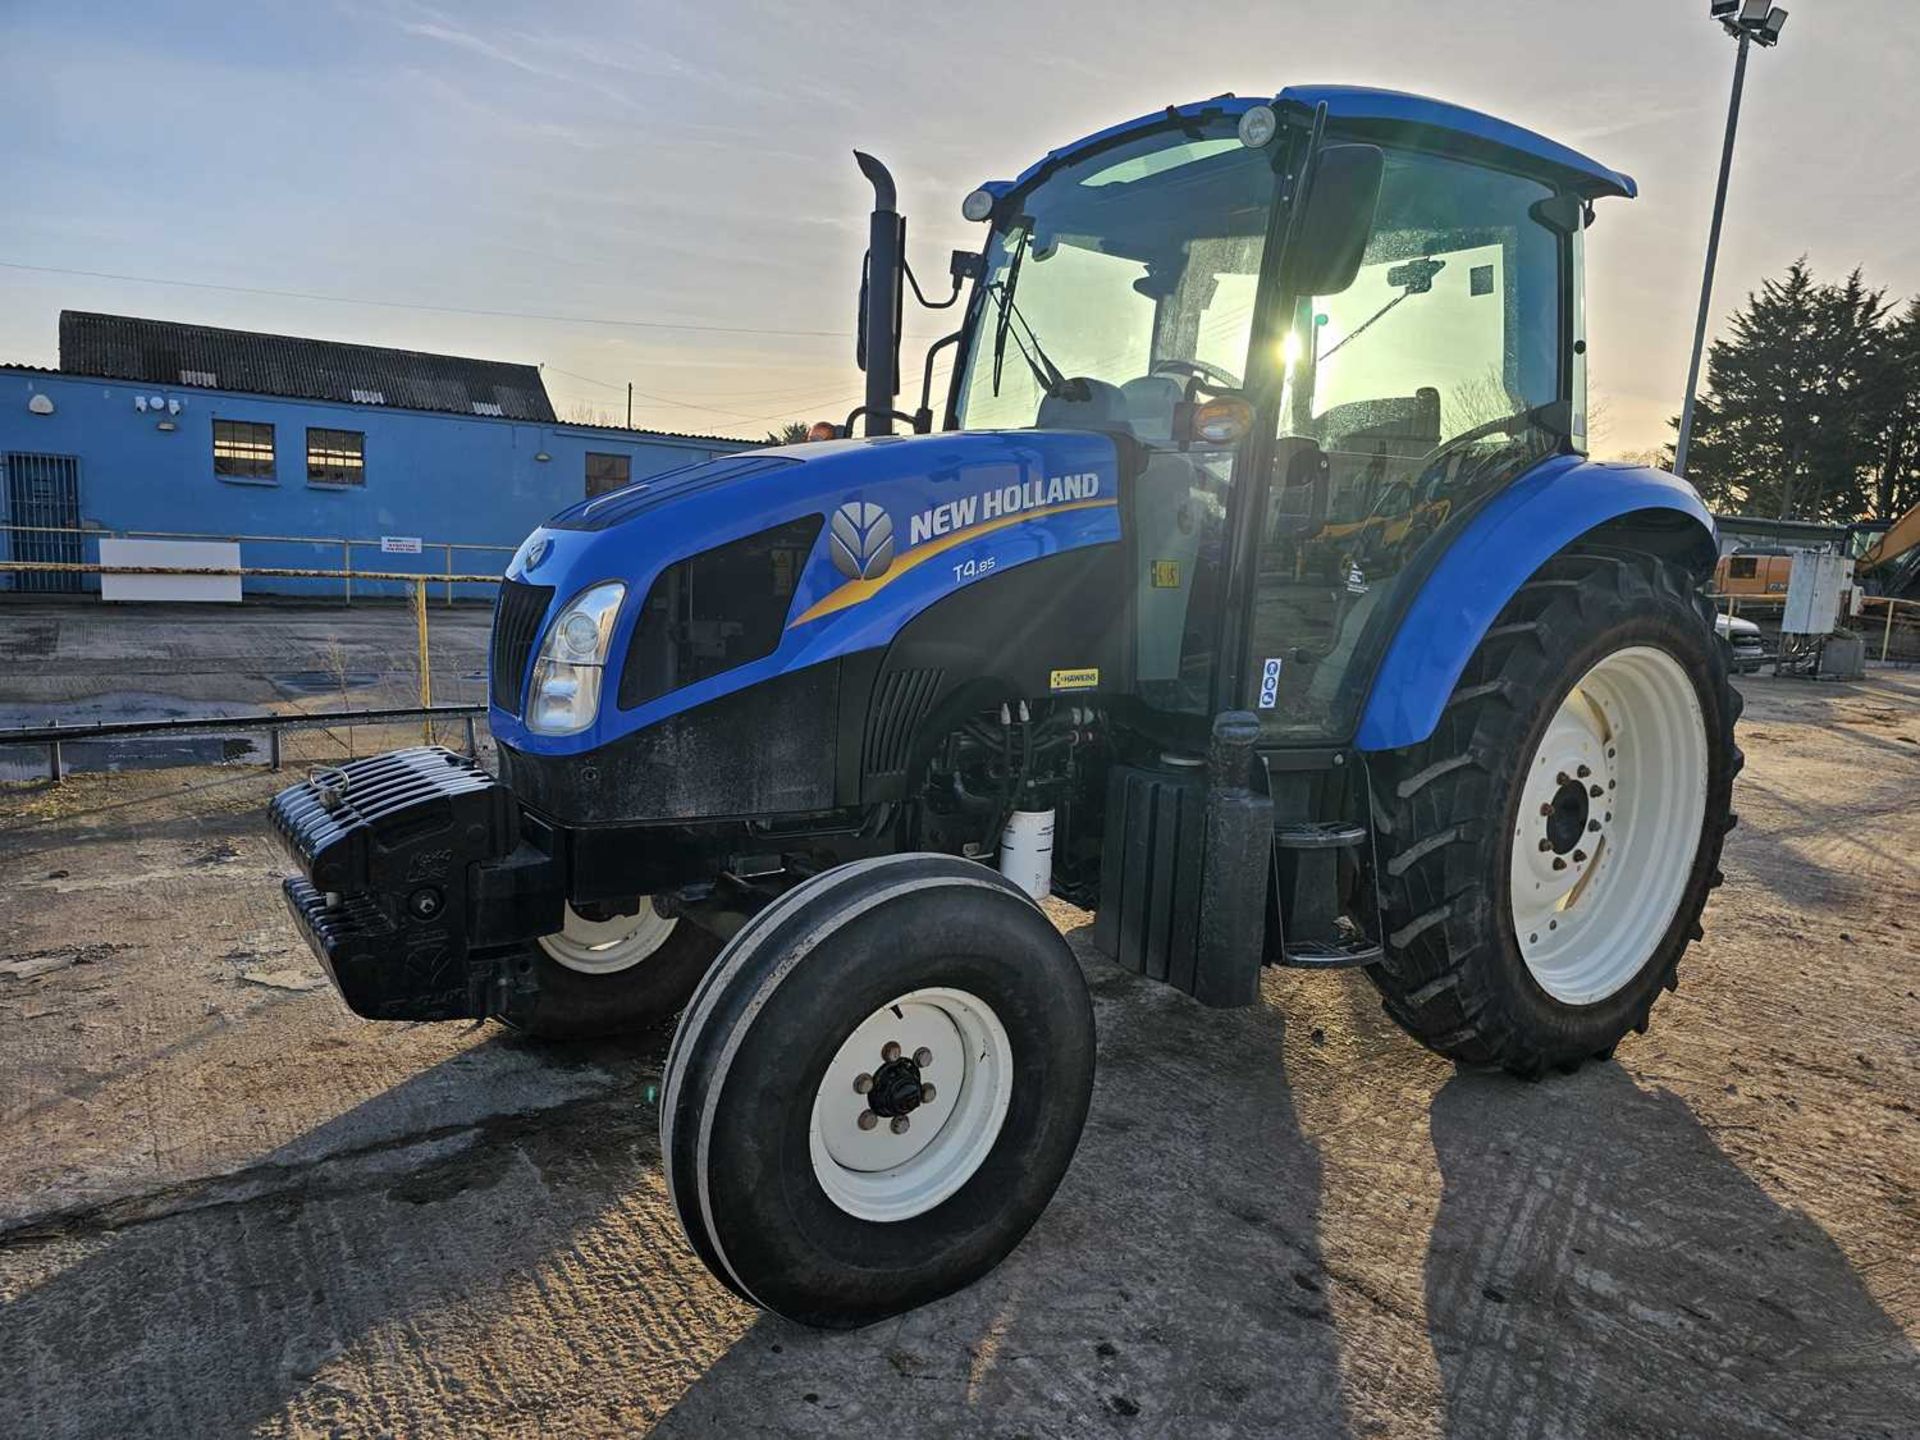 2015 New Holland T4.85 2WD Tractor, Front Weights, 2 Spool Valves, A/C